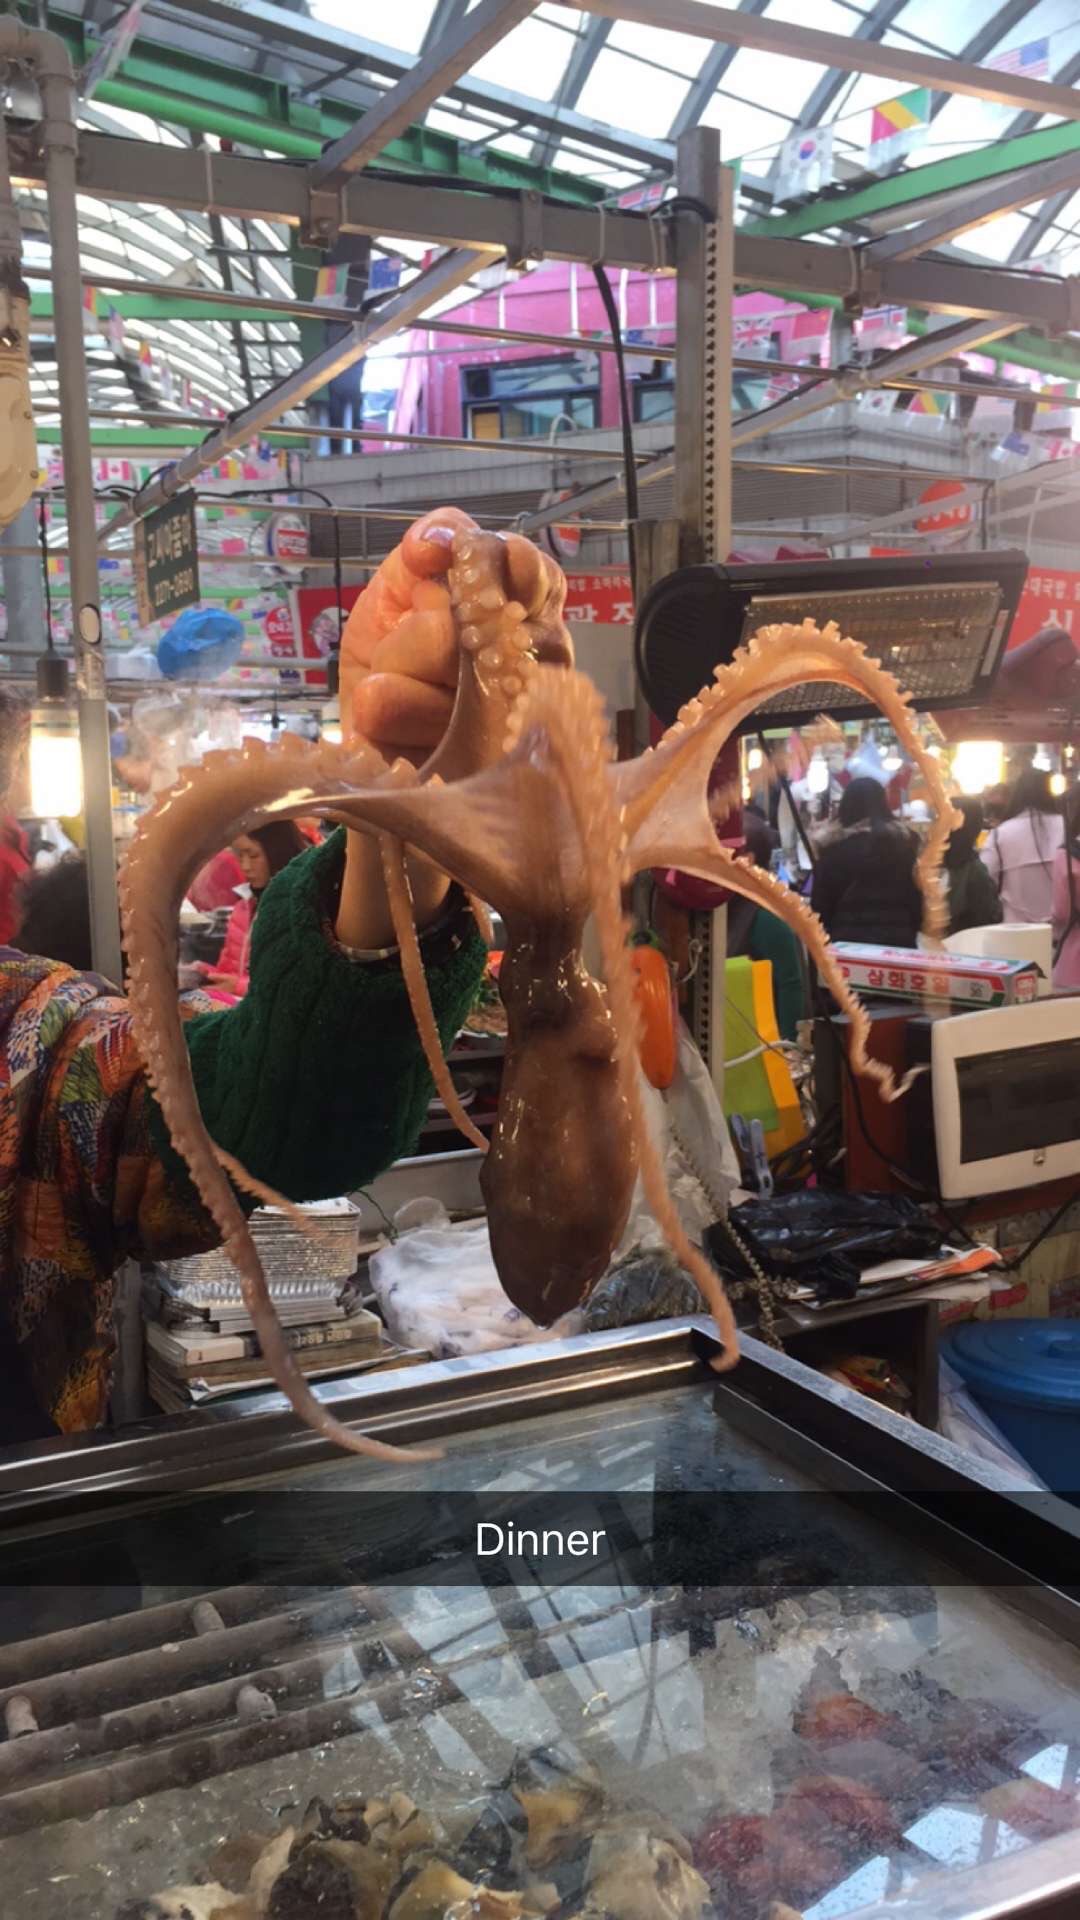 Octopus for sale at Seafood Market in Seoul, South Korea. Life and Seoul of Korea